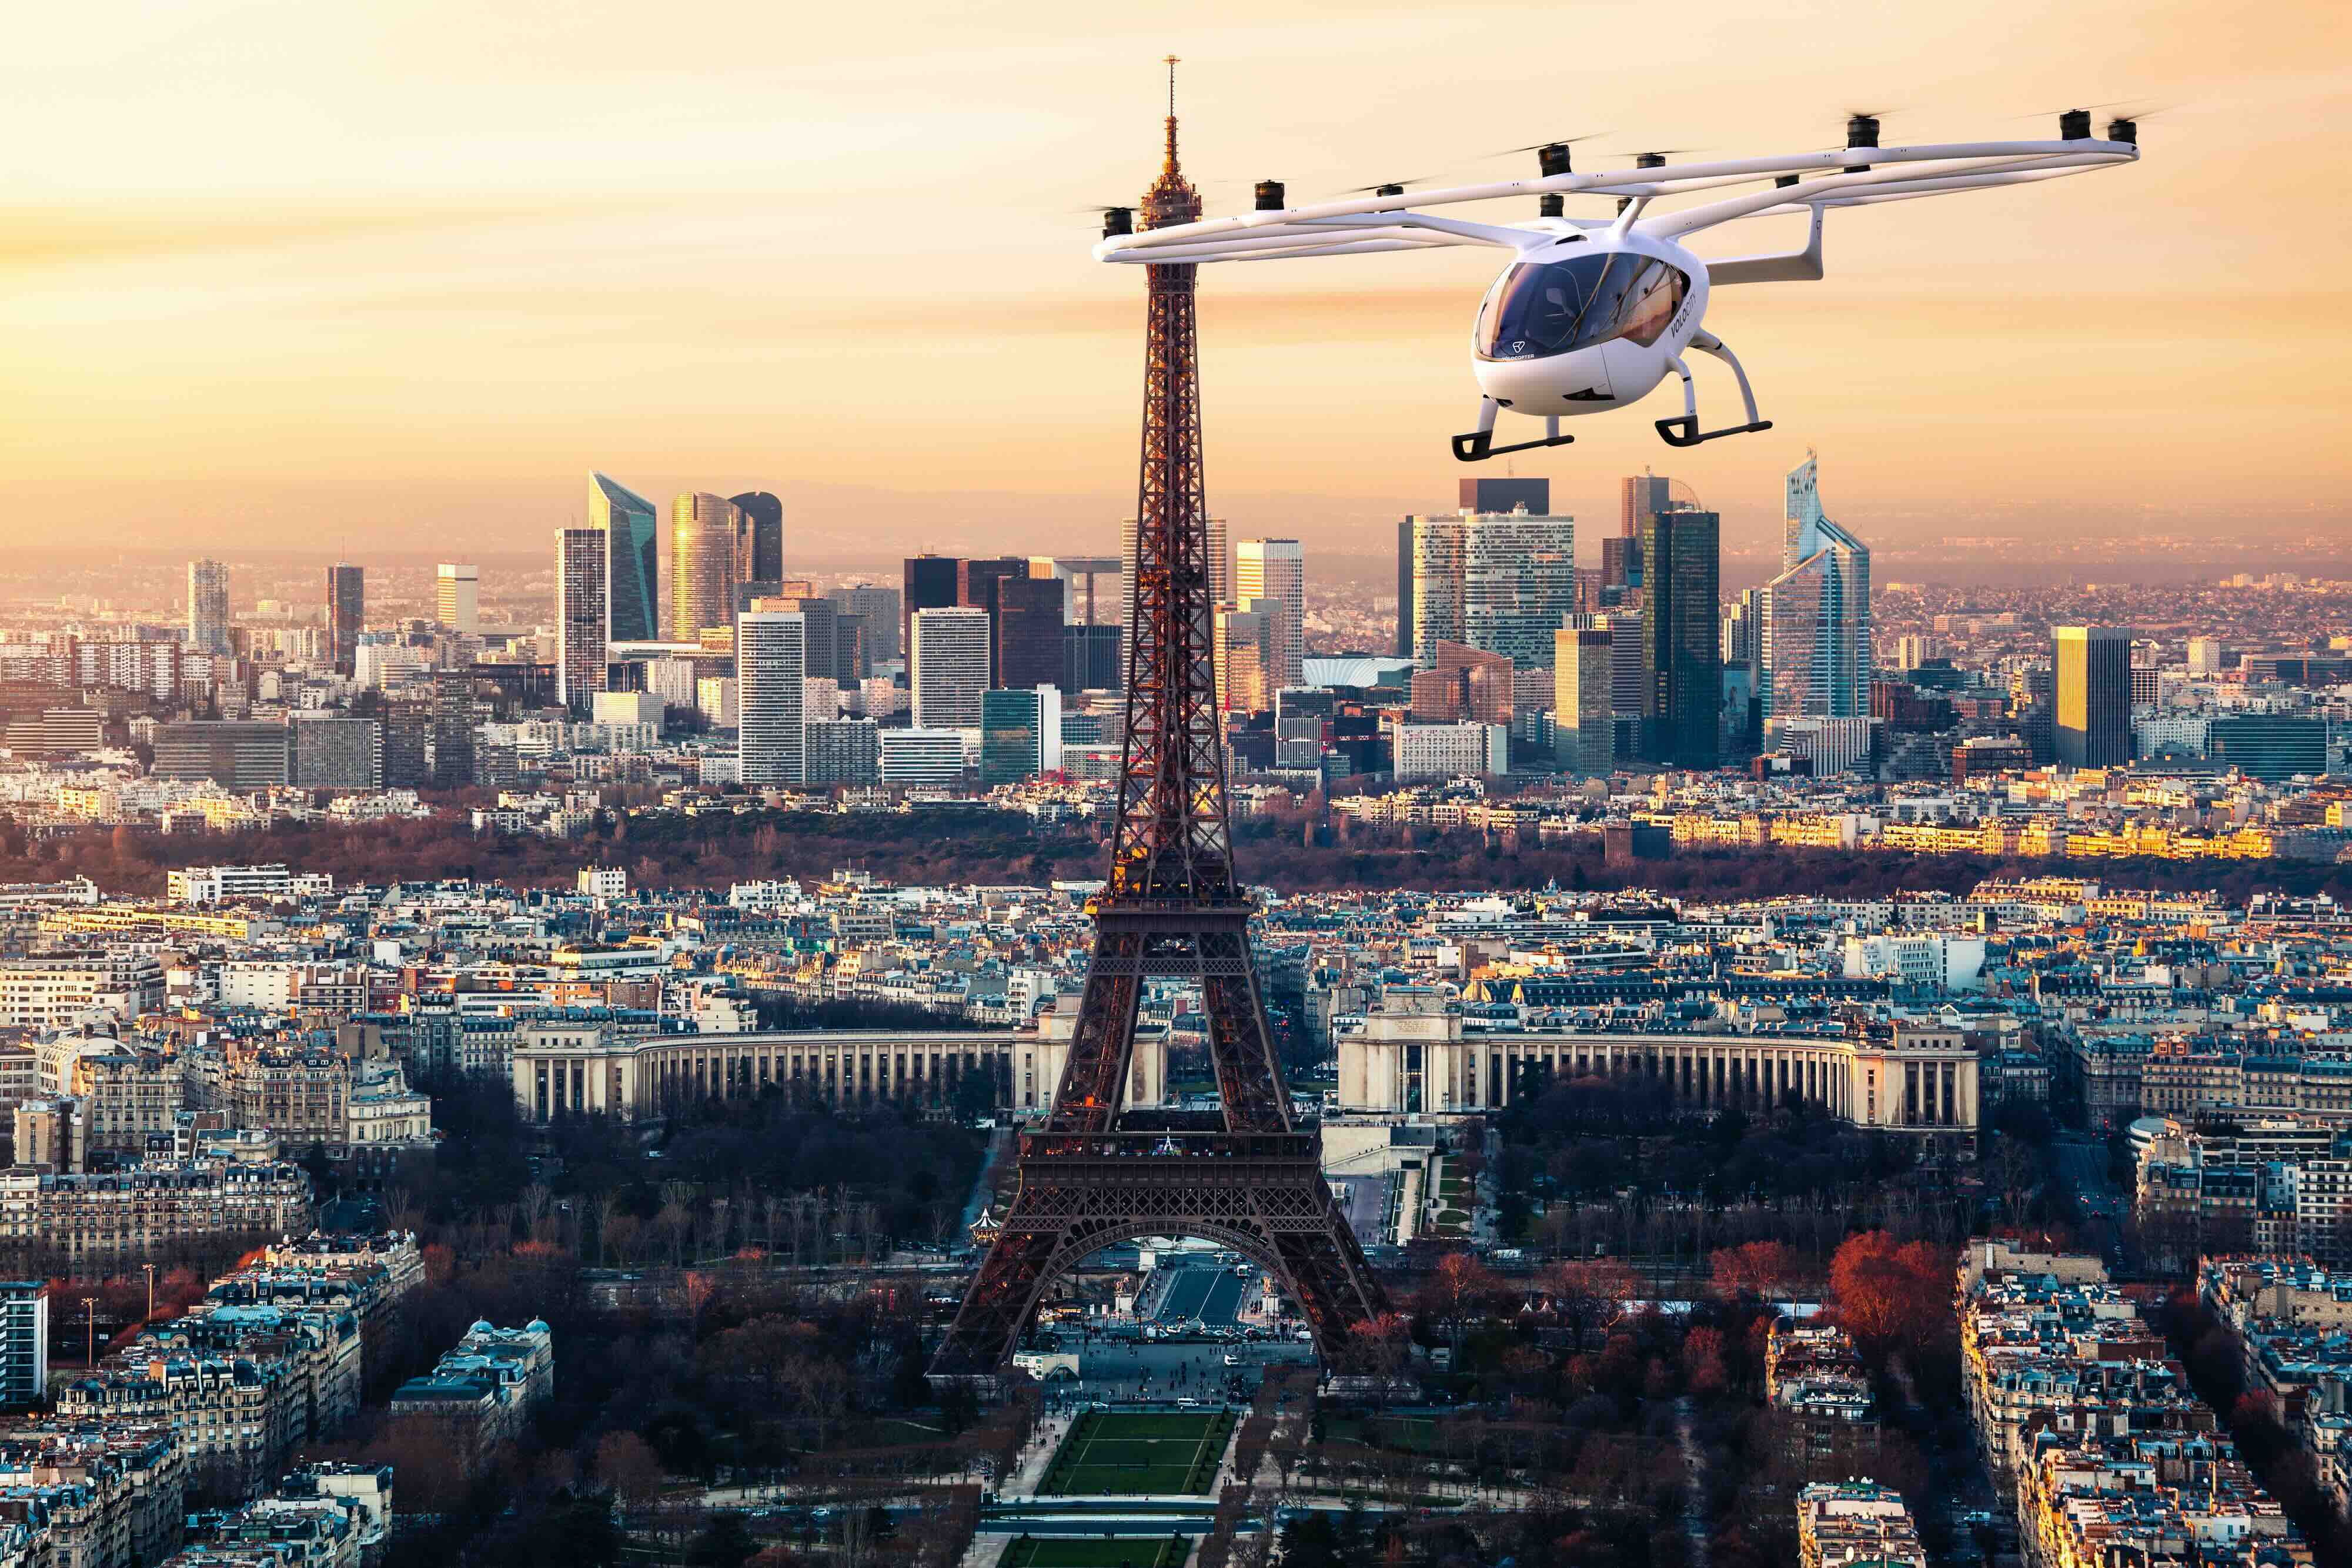 Artist's rendering of VoloCity air taxi flying over Paris.